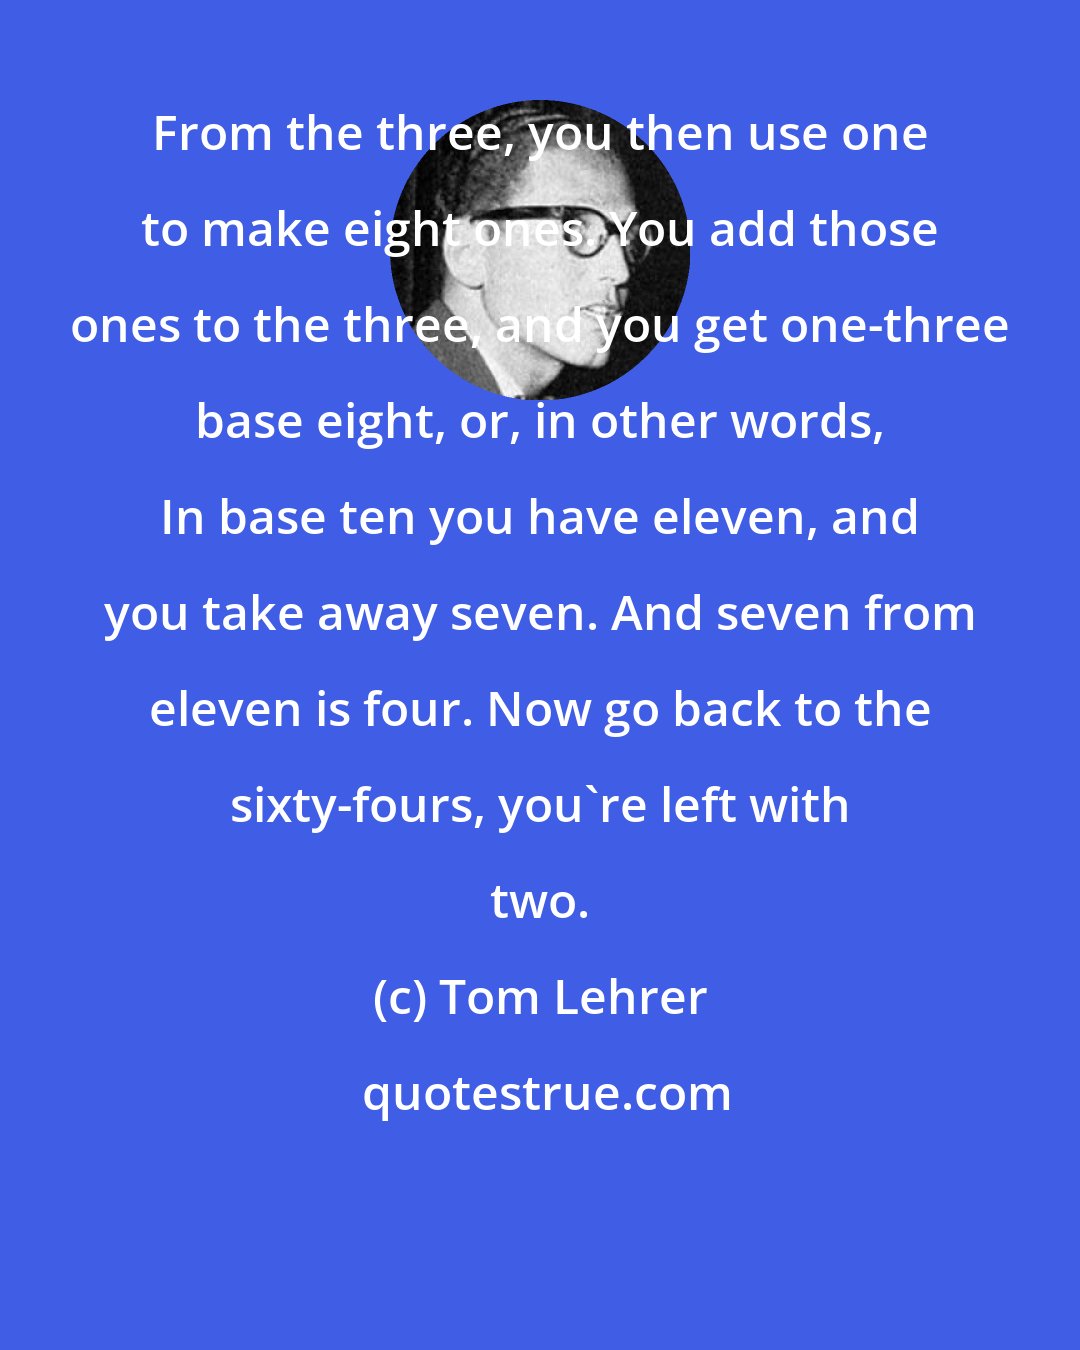 Tom Lehrer: From the three, you then use one to make eight ones. You add those ones to the three, and you get one-three base eight, or, in other words, In base ten you have eleven, and you take away seven. And seven from eleven is four. Now go back to the sixty-fours, you're left with two.